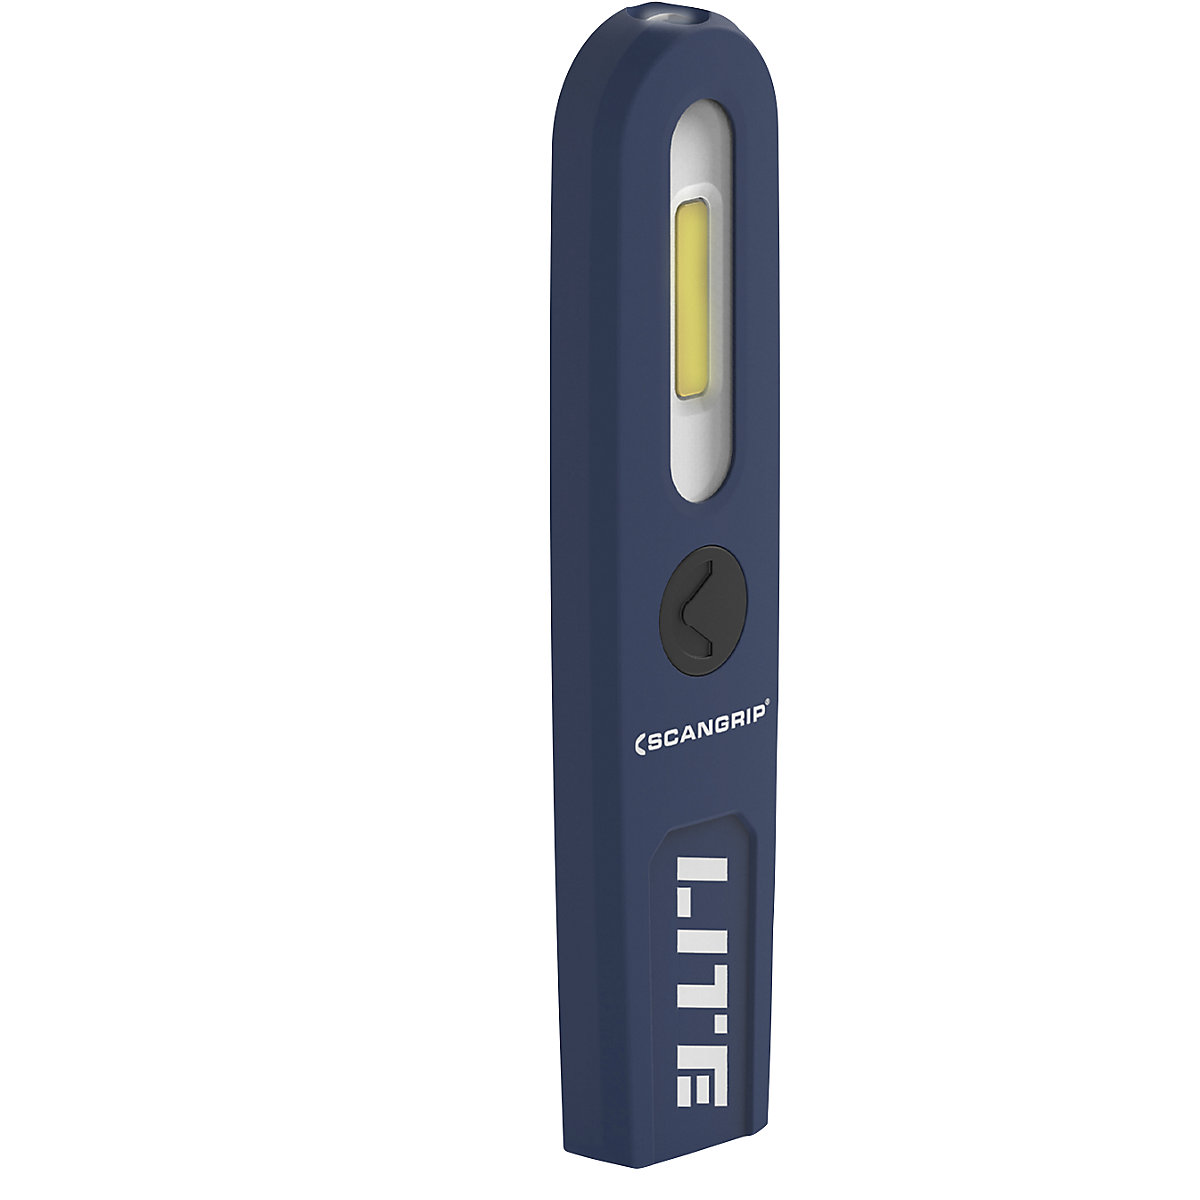 STICK LITE S rechargeable LED hand lamp – SCANGRIP